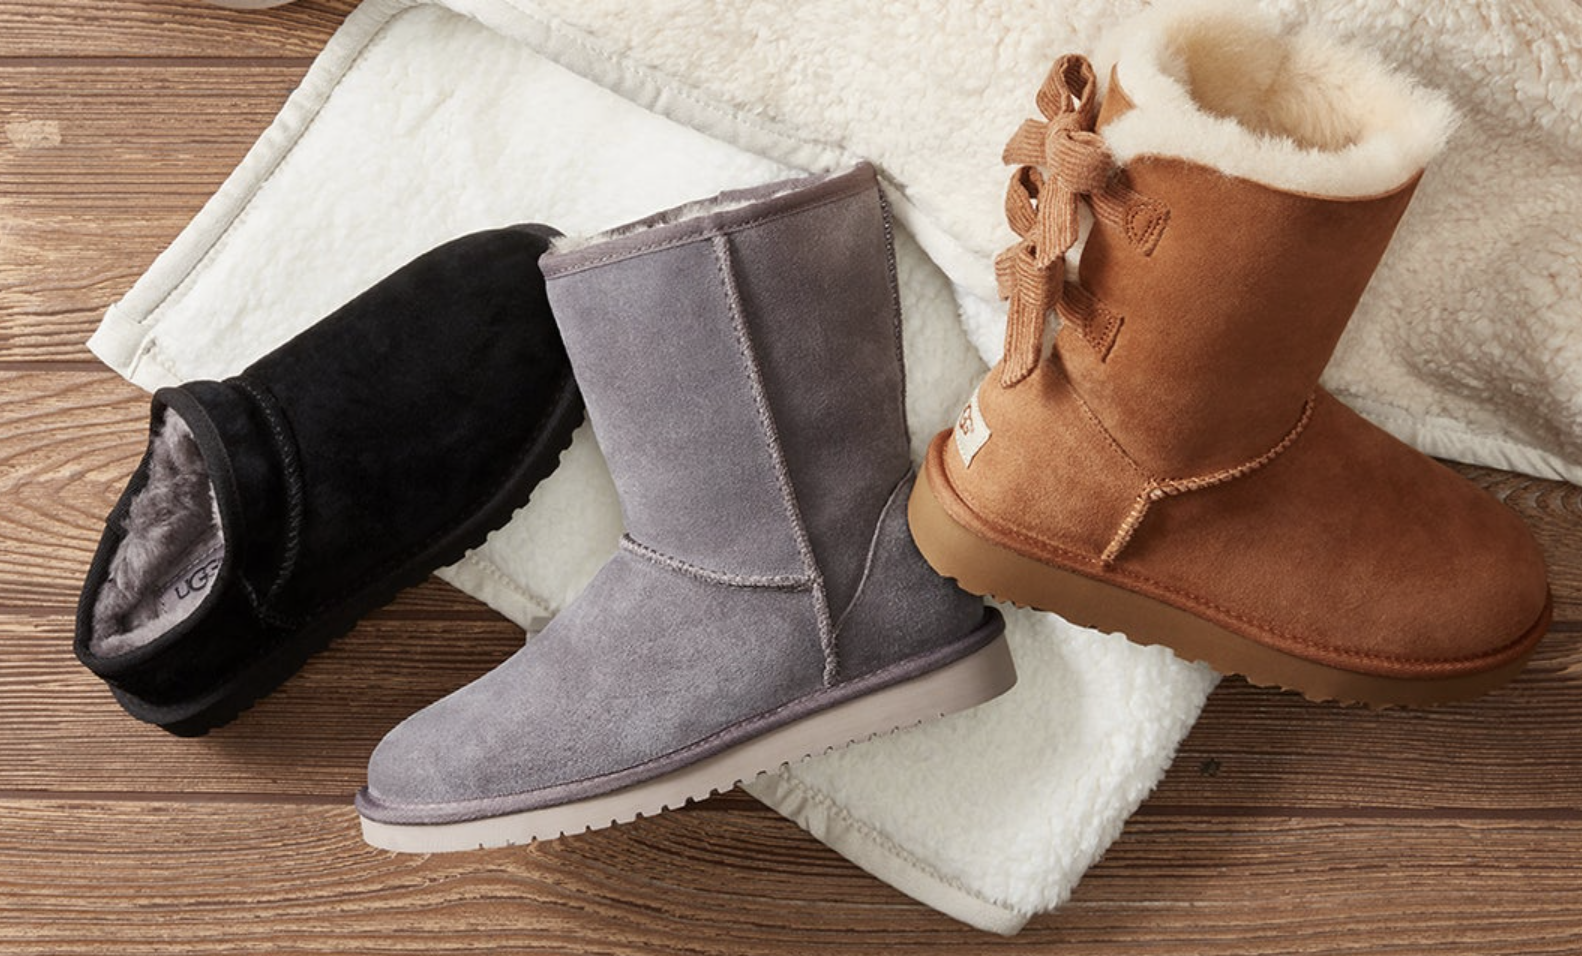 UGG all-weather boots are under $100 